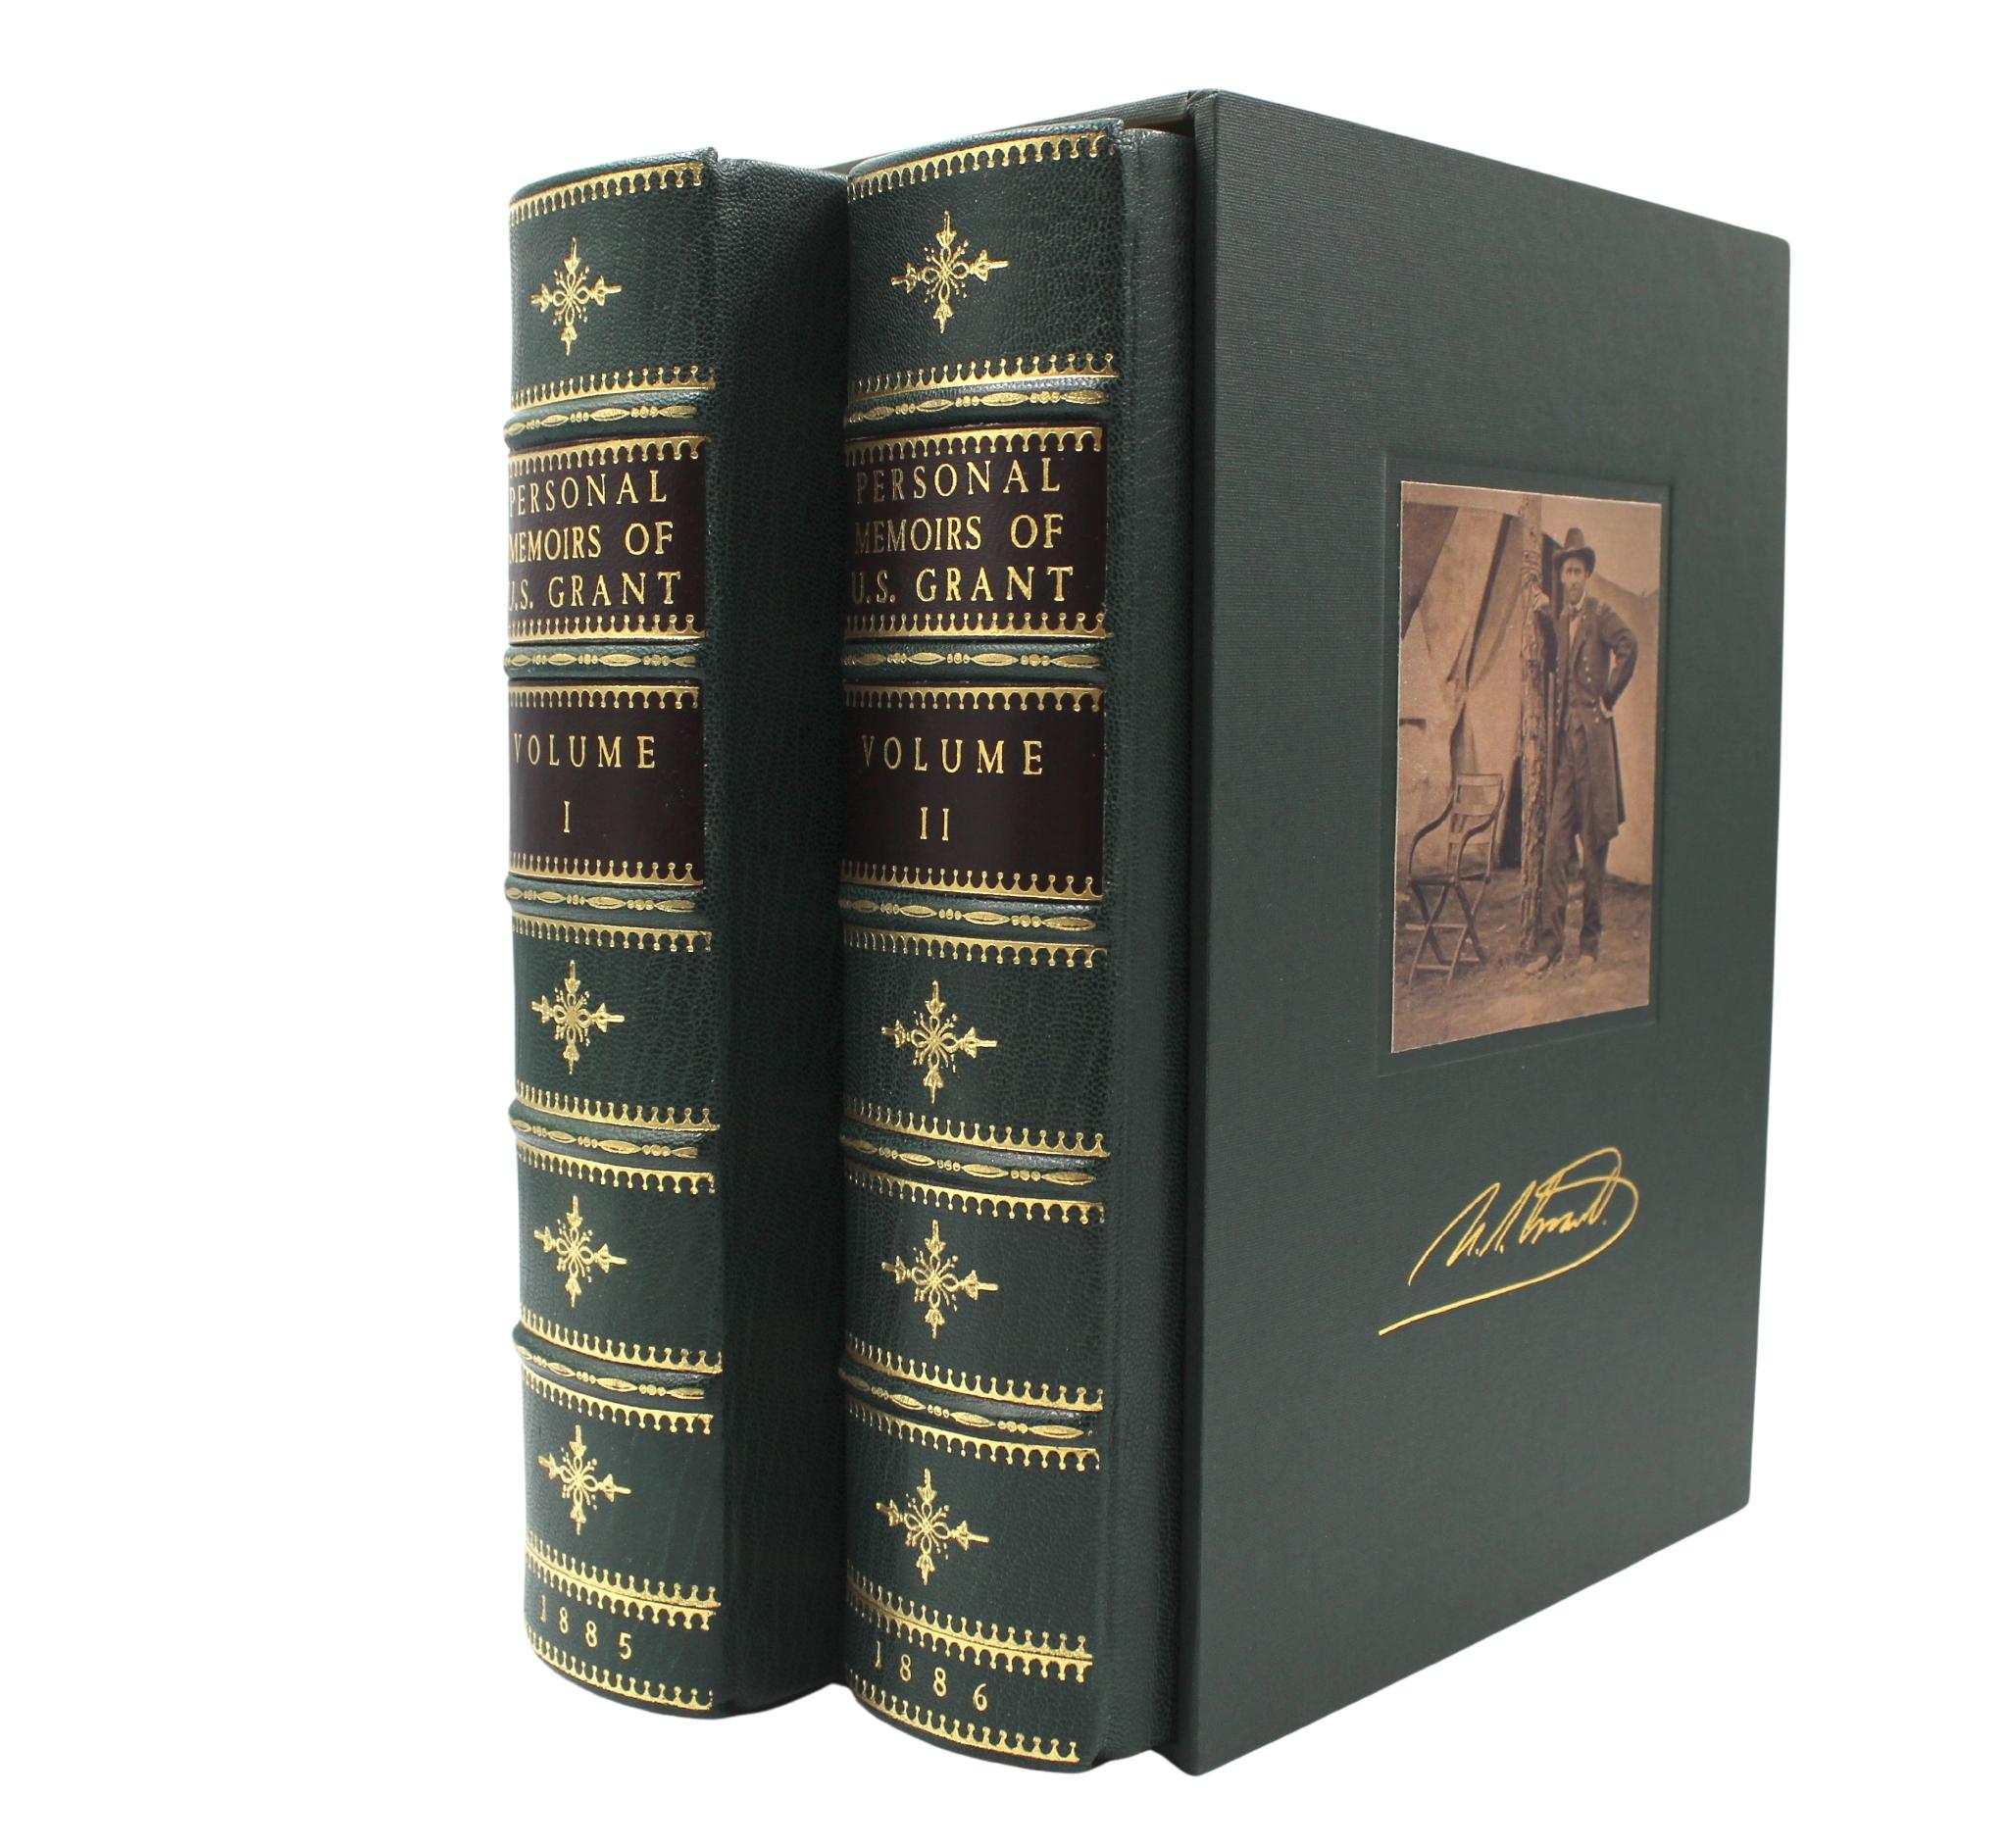 Grant, Ulysses S., Personal Memoirs of U.S. Grant. New York: Charles L. Webster and Co., 1885-1886. Two volume set. Octavo, beautifully rebound in quarter green leather and cloth boards, with an archival matching slipcase.

Offered is a two-volume